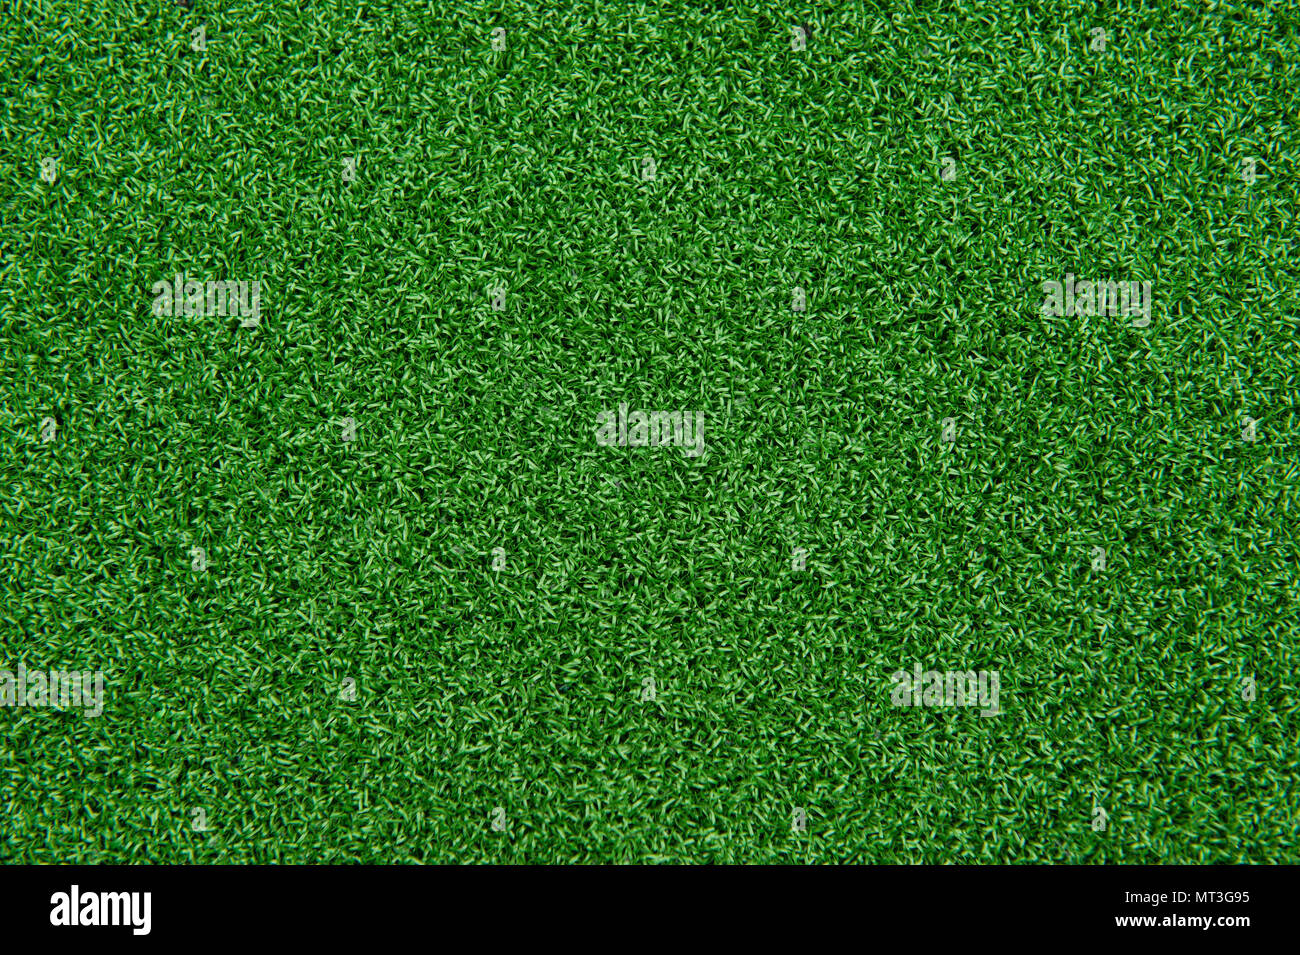 Background texture of synthetic grass or artificial turf used for mini golf and putt putt. Stock Photo